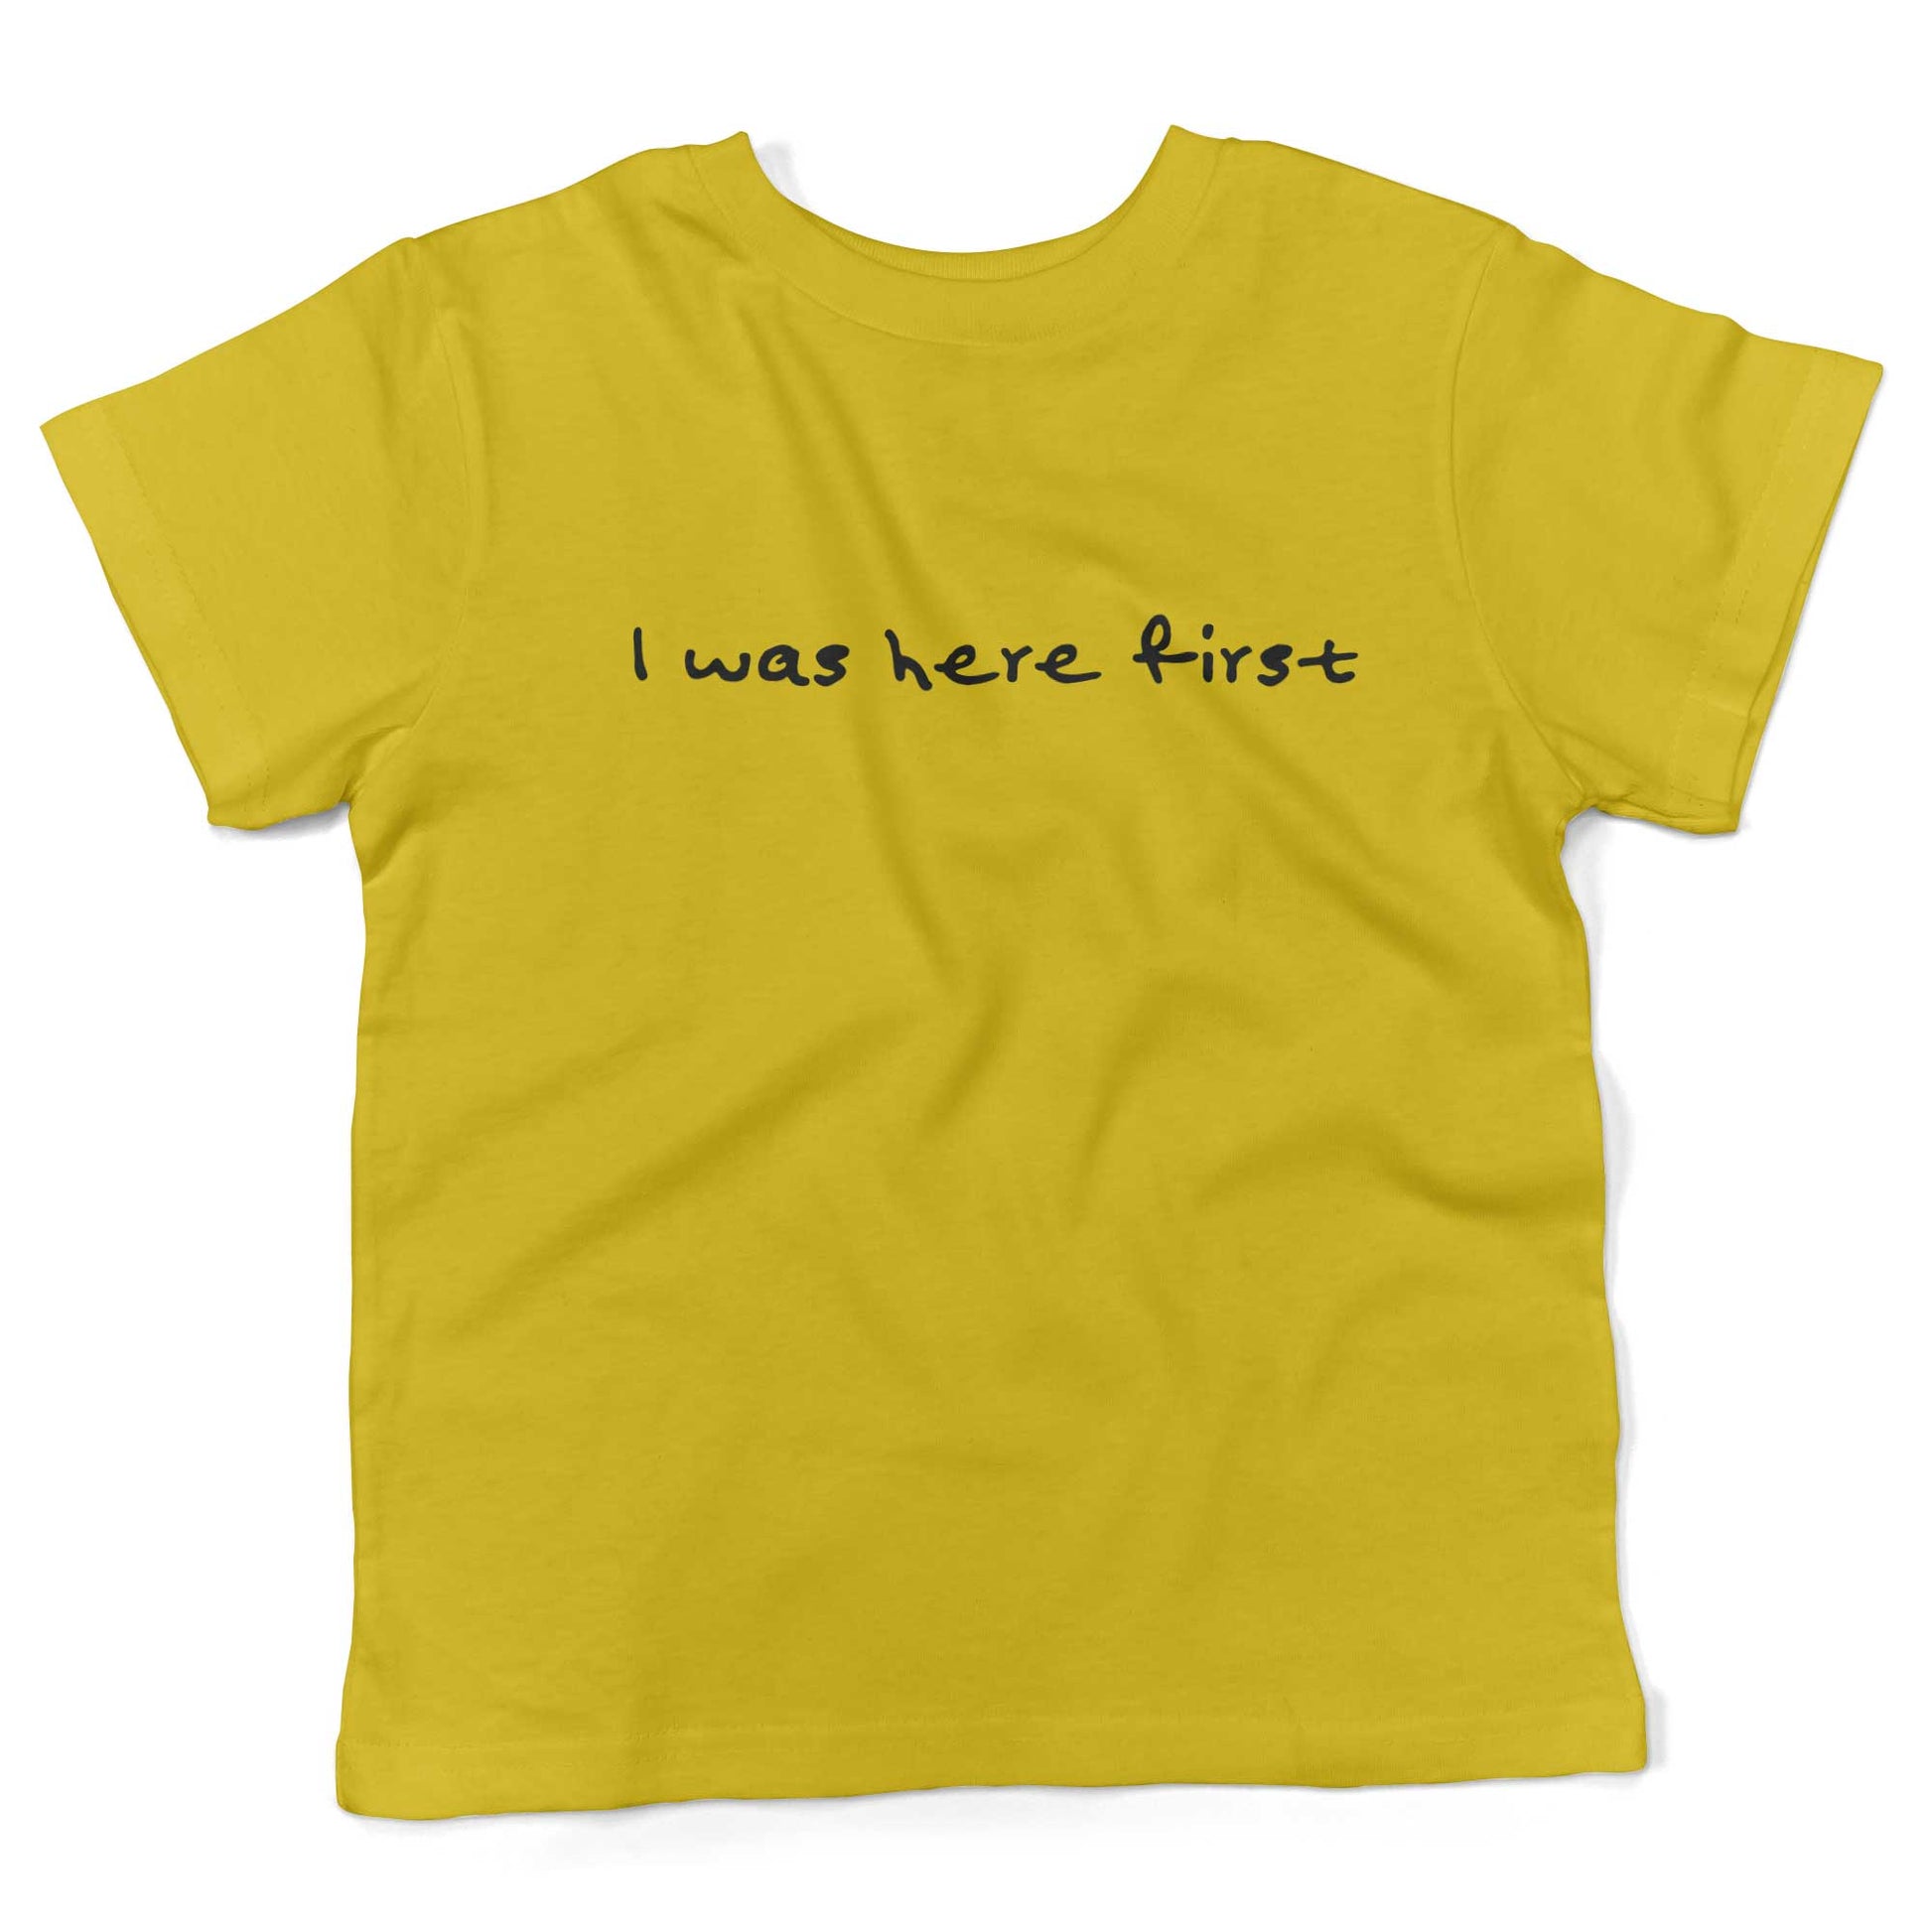 I Was Here First Toddler Shirt-Sunshine Yellow-2T